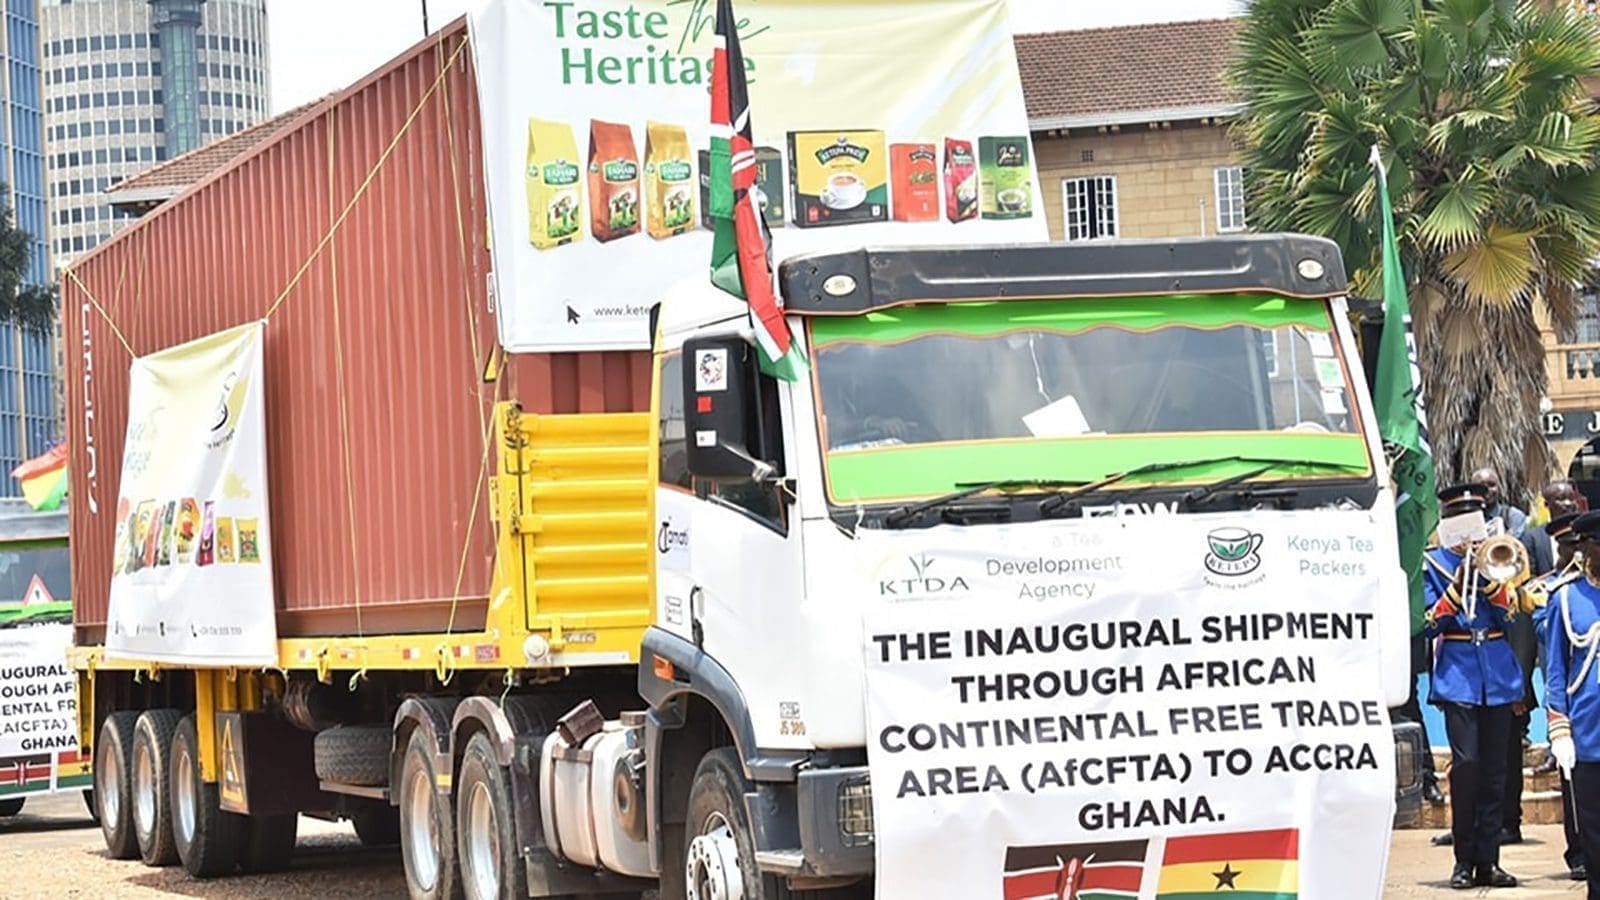 Kenya marks inaugural shipment of value-added tea to Ghana under African Continental Free Trade Area